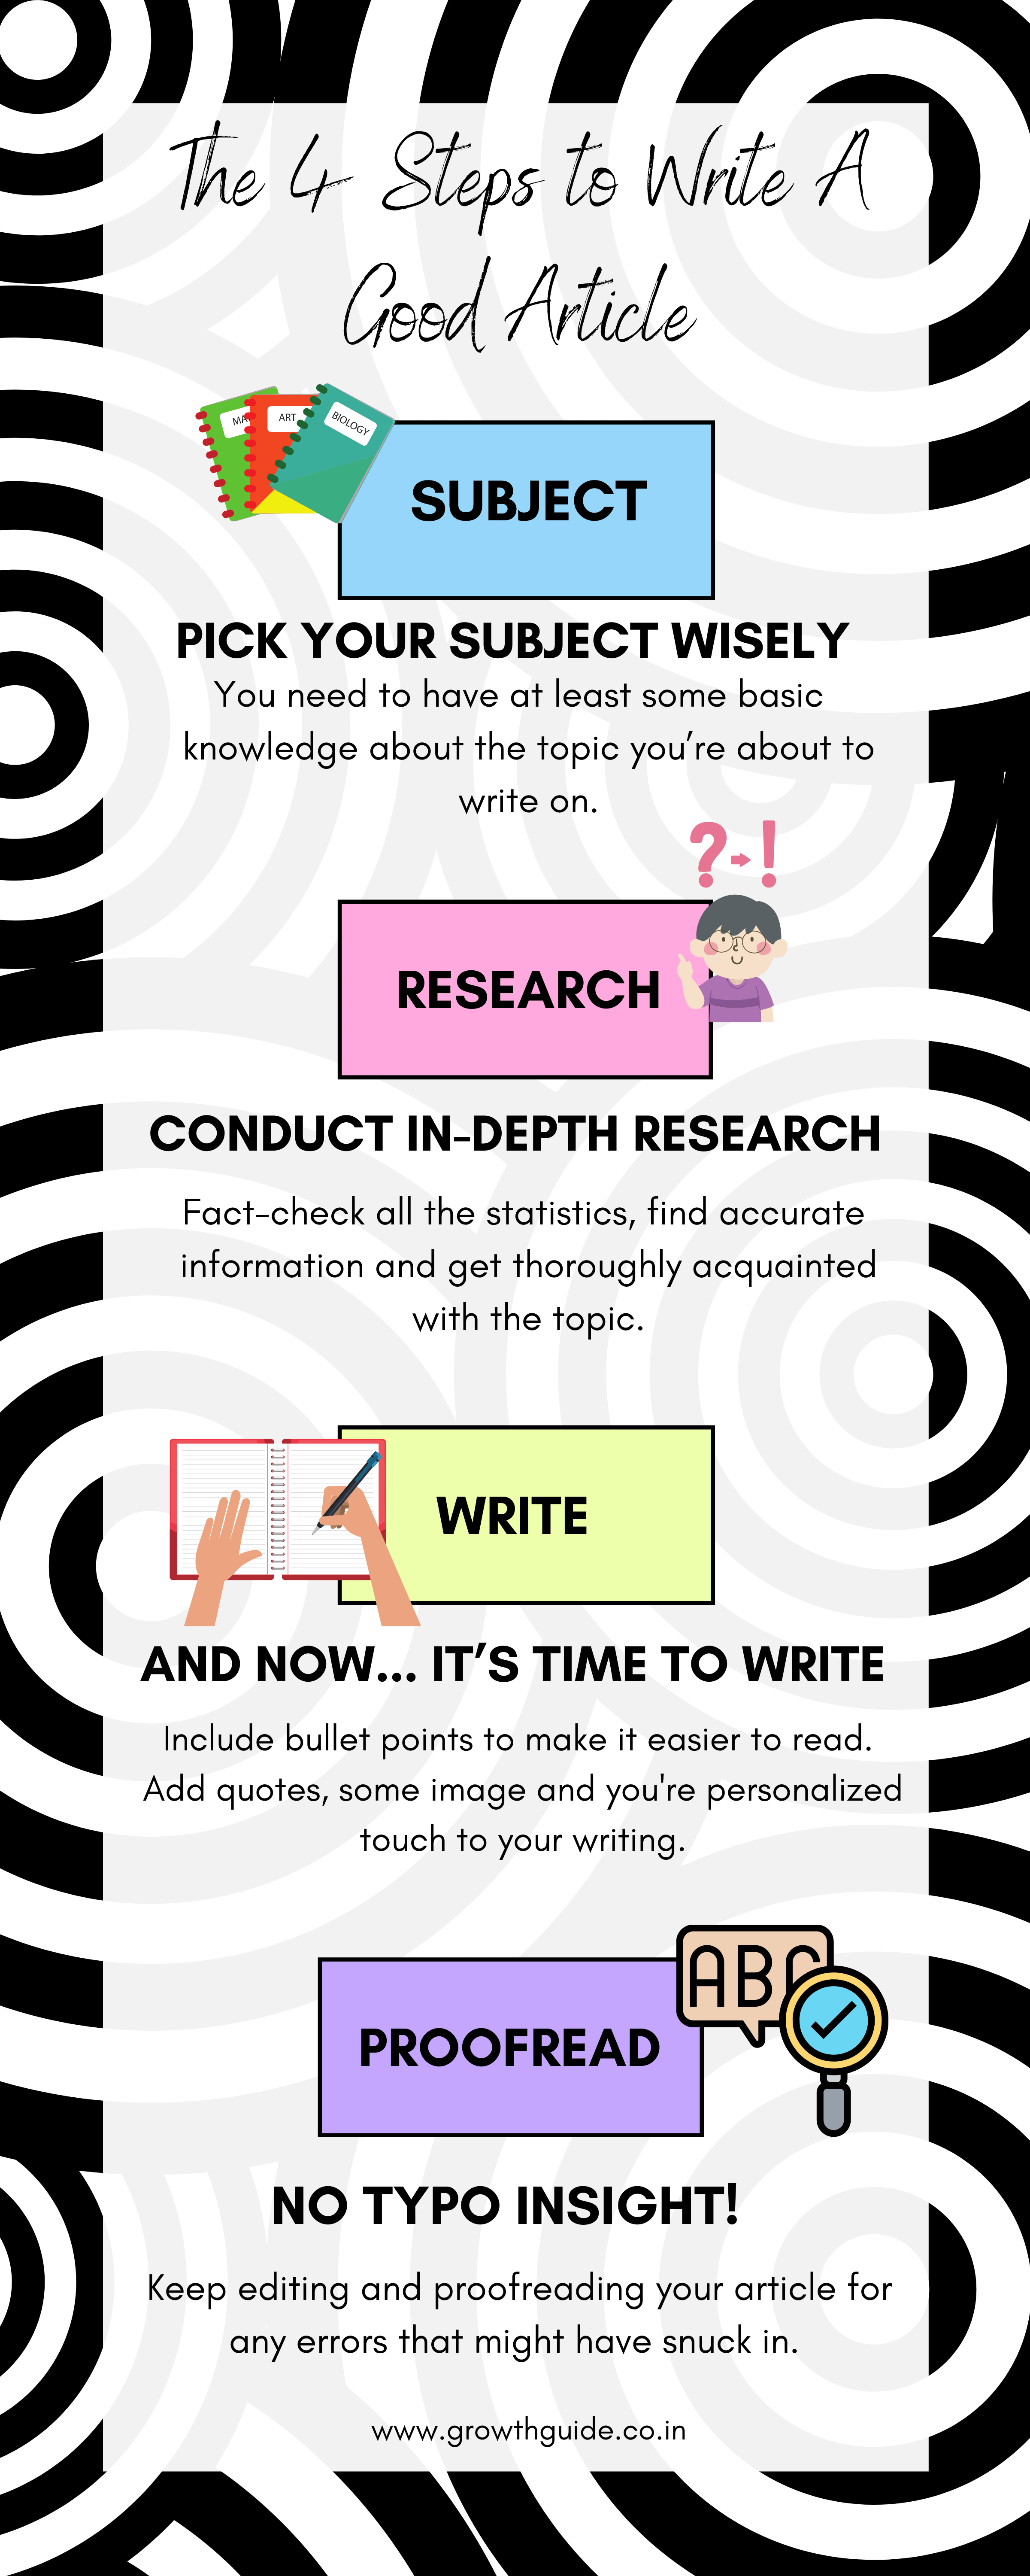 process of writing a good article and content